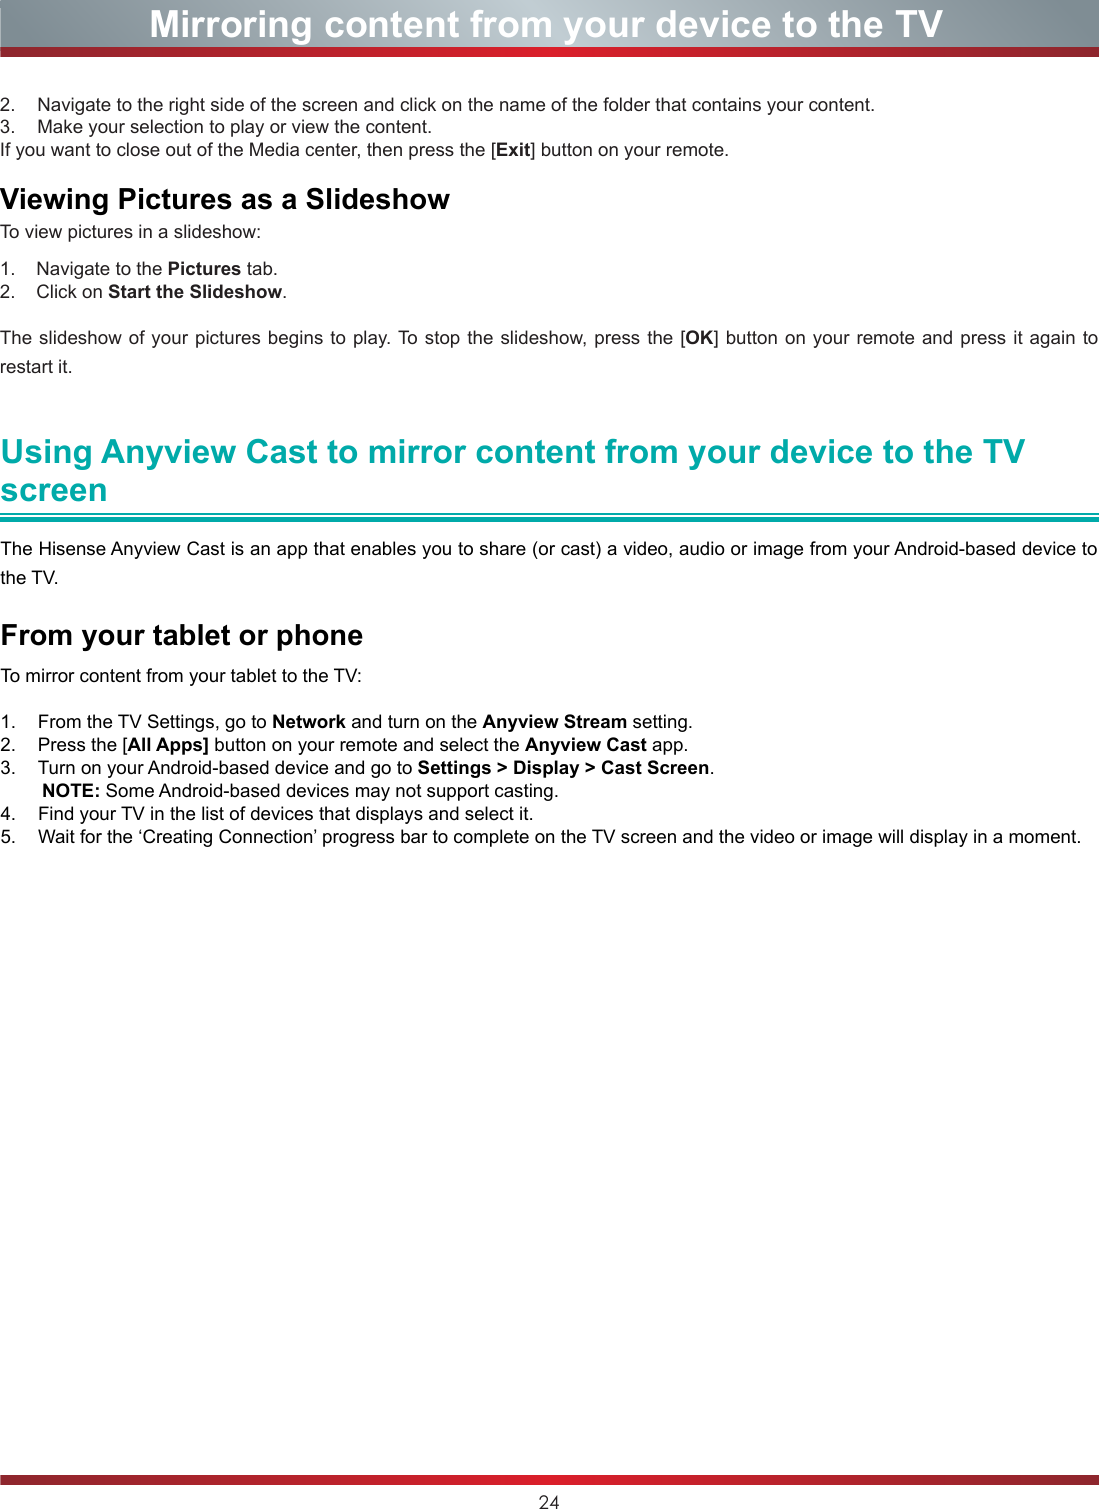 24Mirroring content from your device to the TV2.  Navigate to the right side of the screen and click on the name of the folder that contains your content.3.  Make your selection to play or view the content.If you want to close out of the Media center, then press the [Exit] button on your remote.Viewing Pictures as a SlideshowTo view pictures in a slideshow:1.    Navigate to the Pictures tab.2.    Click on Start the Slideshow.The slideshow of your pictures begins to play. To stop the slideshow, press the [OK] button on your remote and press it again to restart it. Using Anyview Cast to mirror content from your device to the TV screenThe Hisense Anyview Cast is an app that enables you to share (or cast) a video, audio or image from your Android-based device to the TV.From your tablet or phoneTo mirror content from your tablet to the TV:1.  From the TV Settings, go to Network and turn on the Anyview Stream setting.2.  Press the [All Apps] button on your remote and select the Anyview Cast app.3.  Turn on your Android-based device and go to Settings &gt; Display &gt; Cast Screen.           NOTE: Some Android-based devices may not support casting.4.  Find your TV in the list of devices that displays and select it.5.  Wait for the ‘Creating Connection’ progress bar to complete on the TV screen and the video or image will display in a moment.